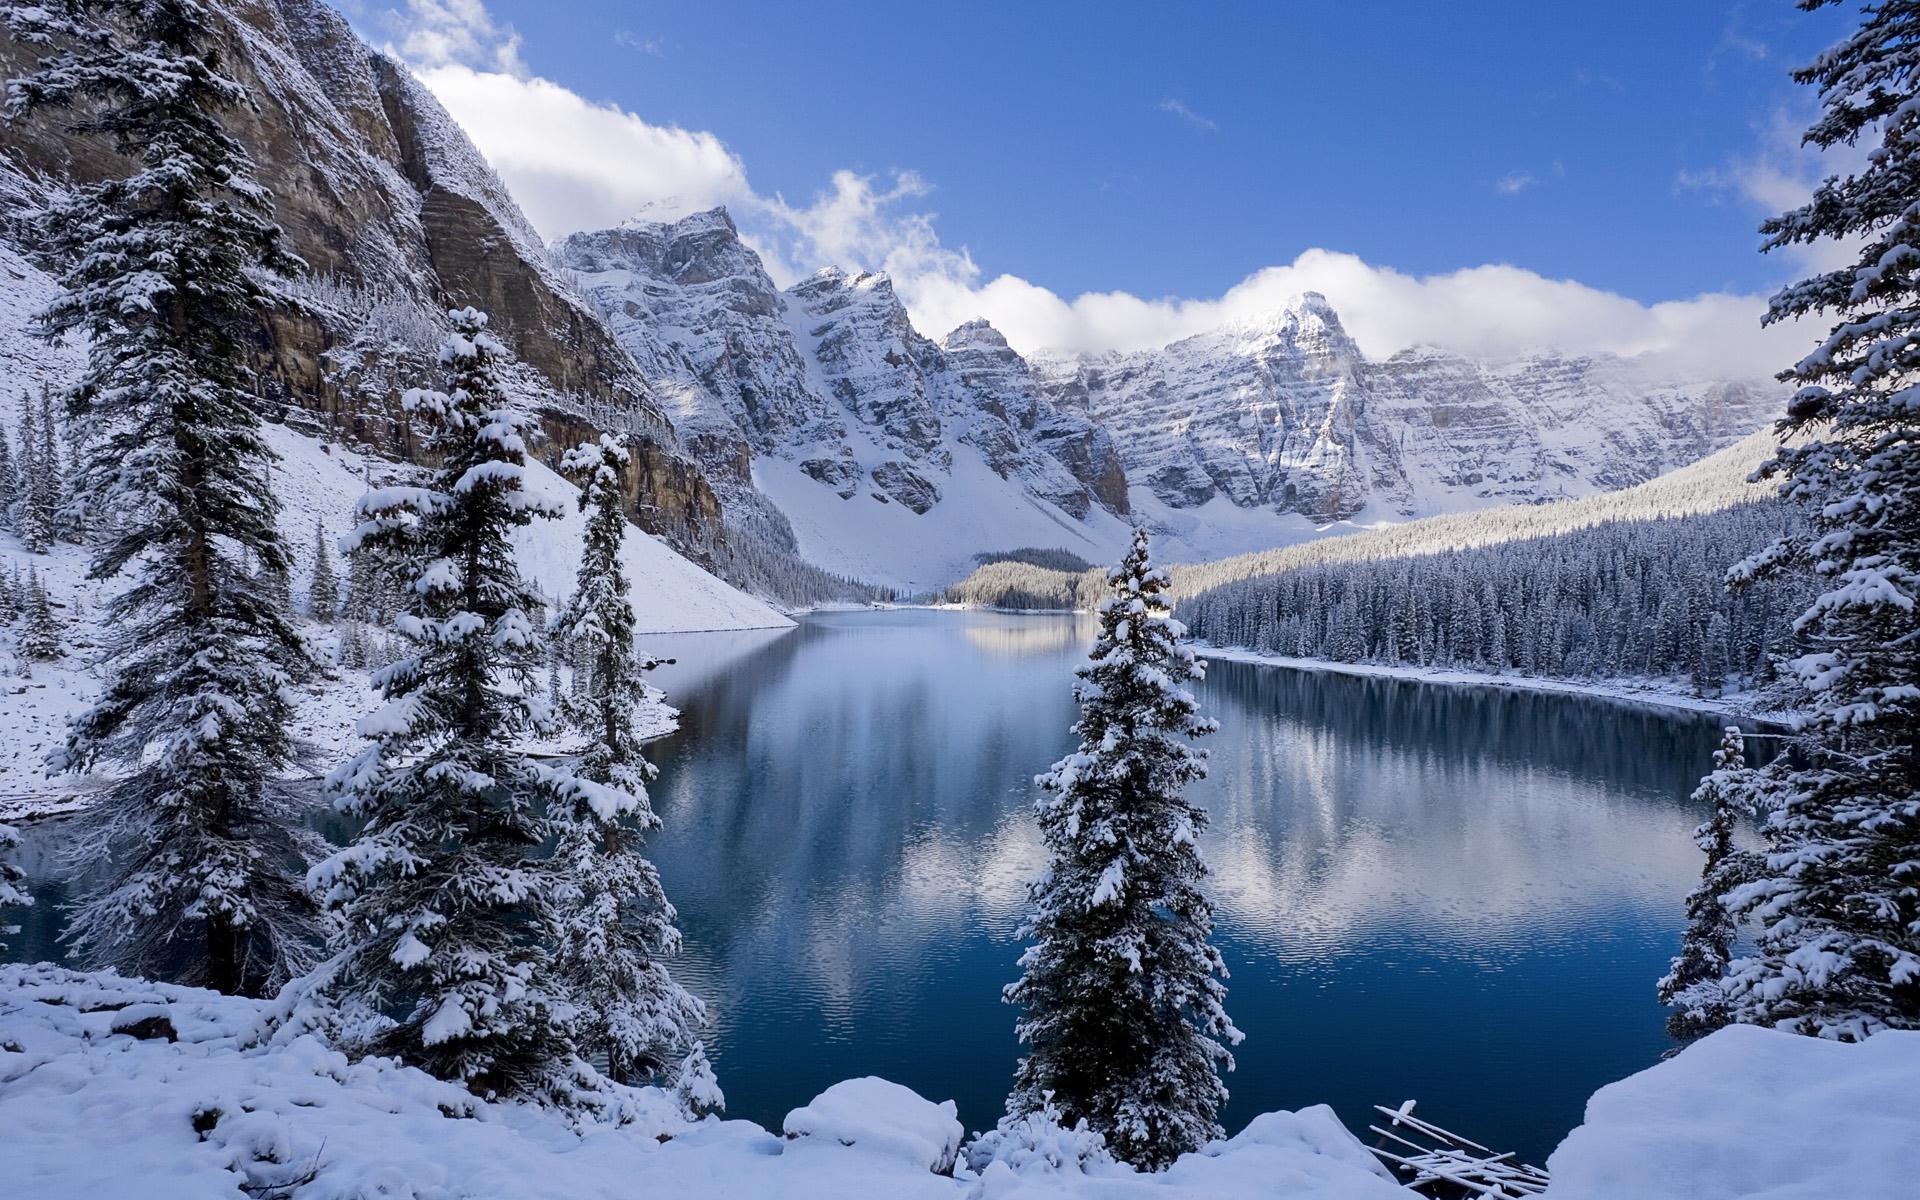  2015 By Stephen Comments Off on Winter Scenes for Desktop Wallpapers 1920x1200